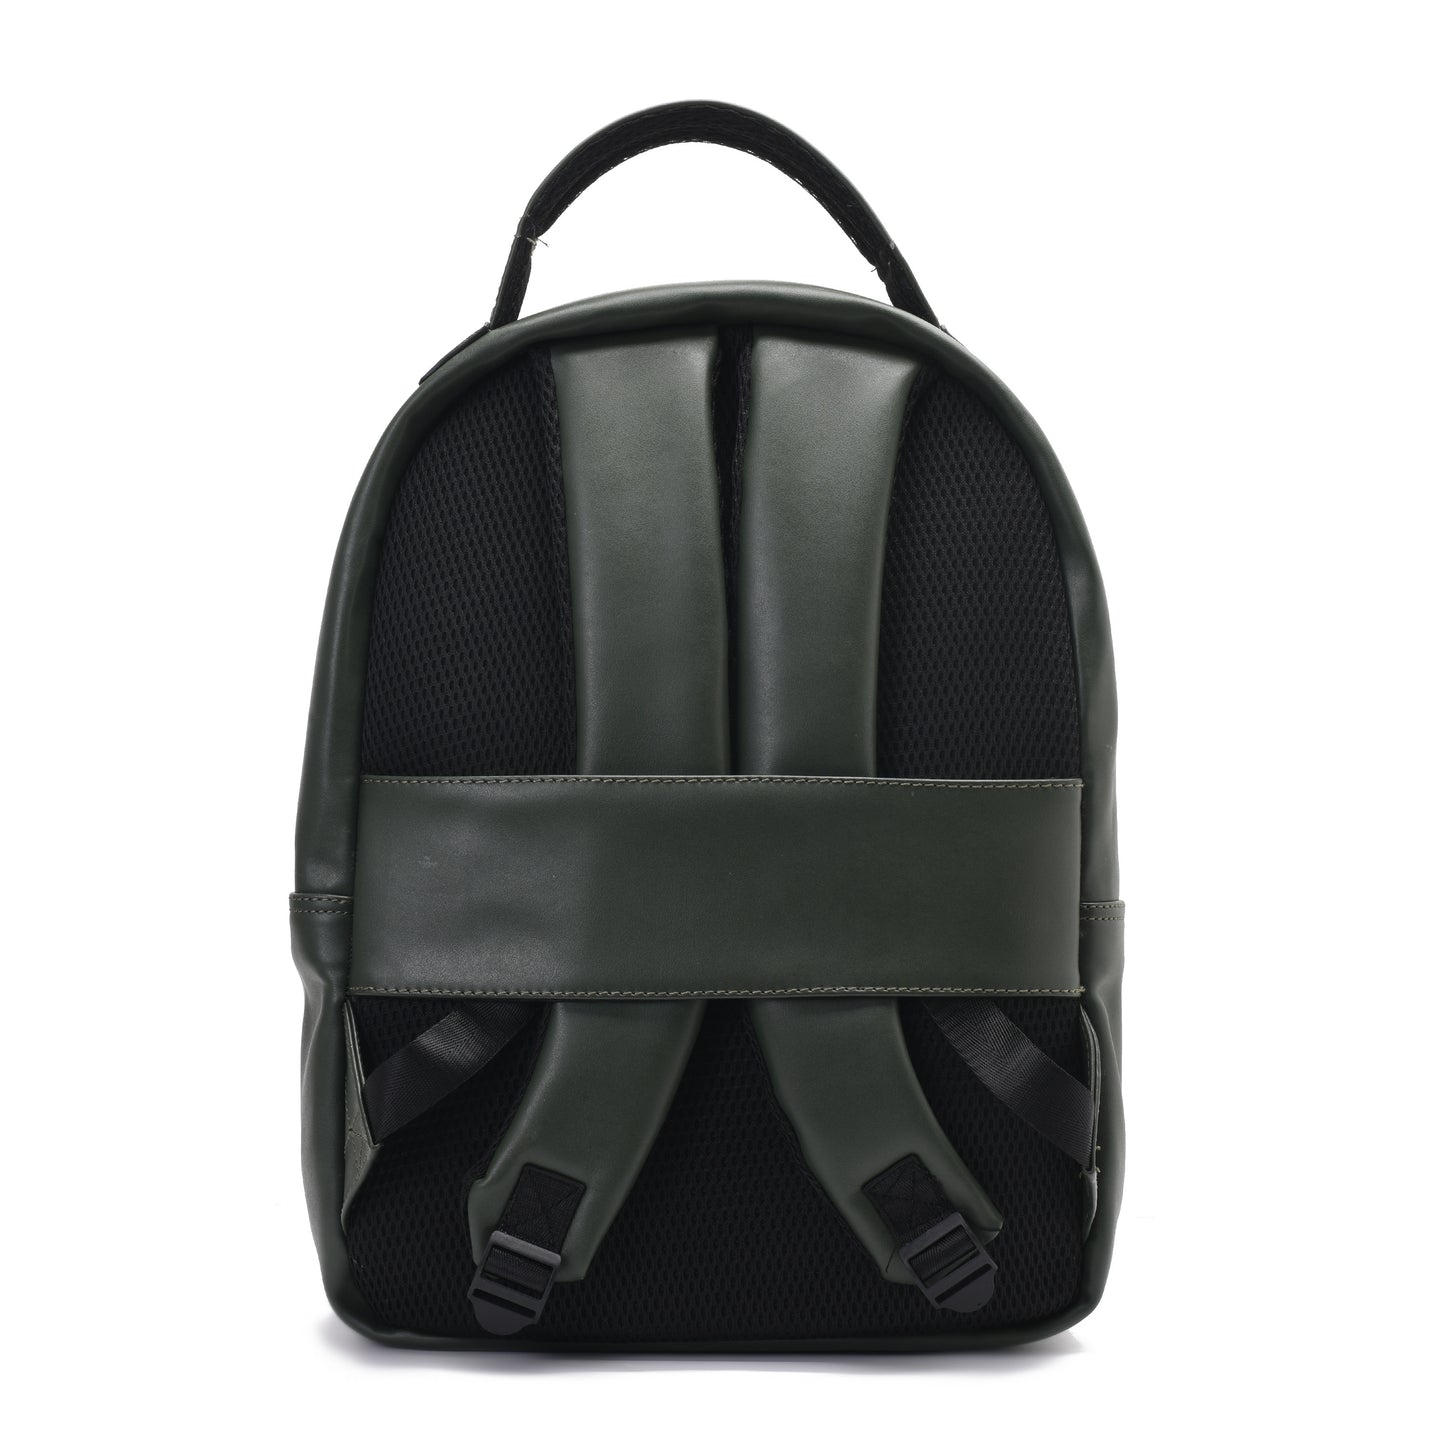 Laptop Classic olive green Backpack -Code 507